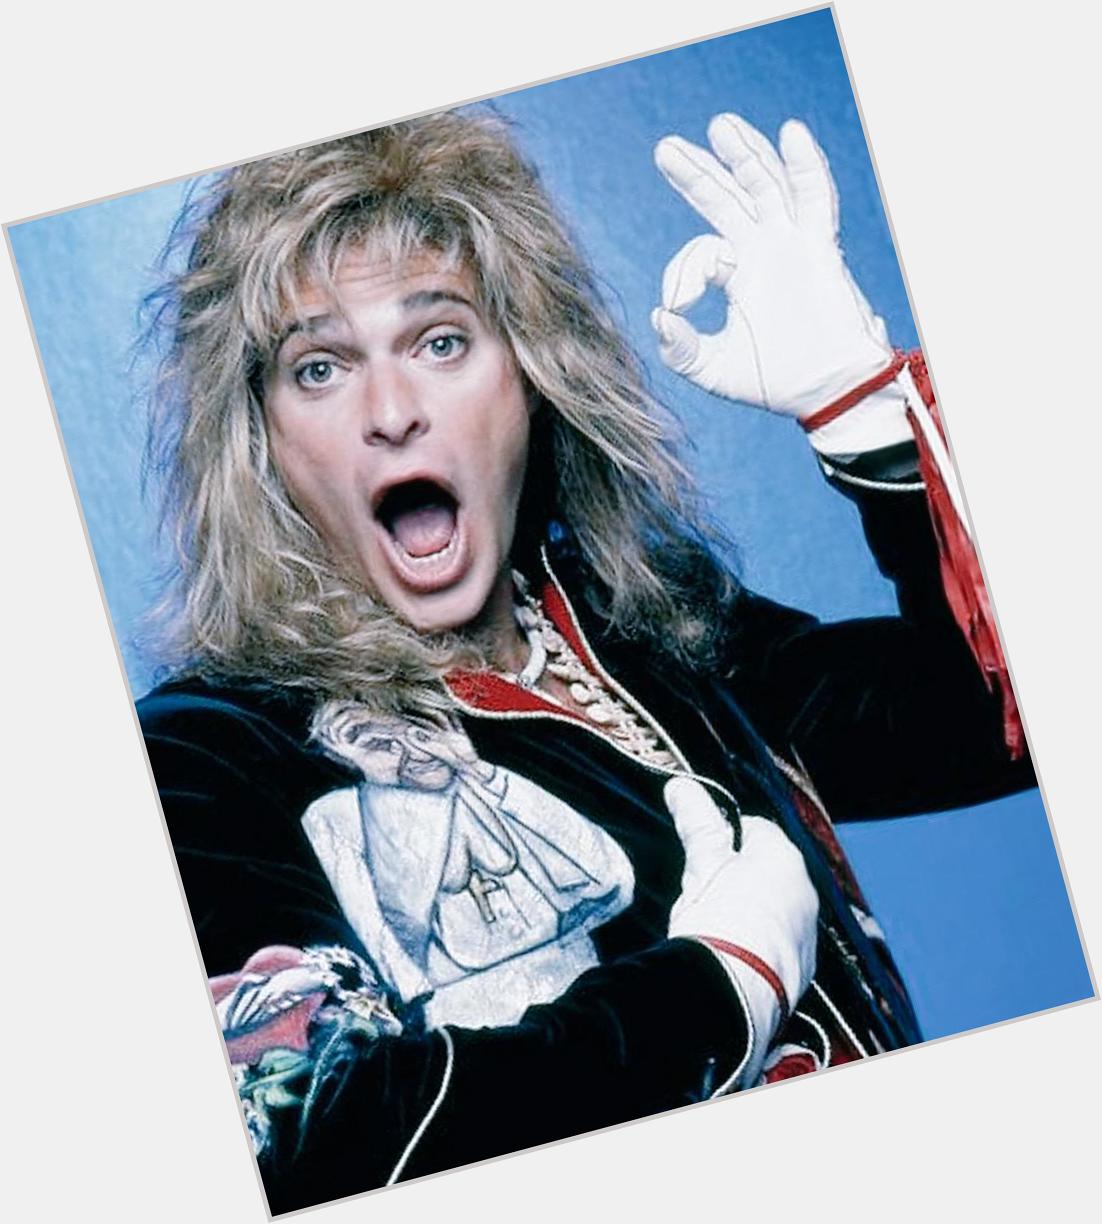 Happy 61st Birthday To The Most Electrifying Frontman In Hard Rock Mr. David Lee Roth! 